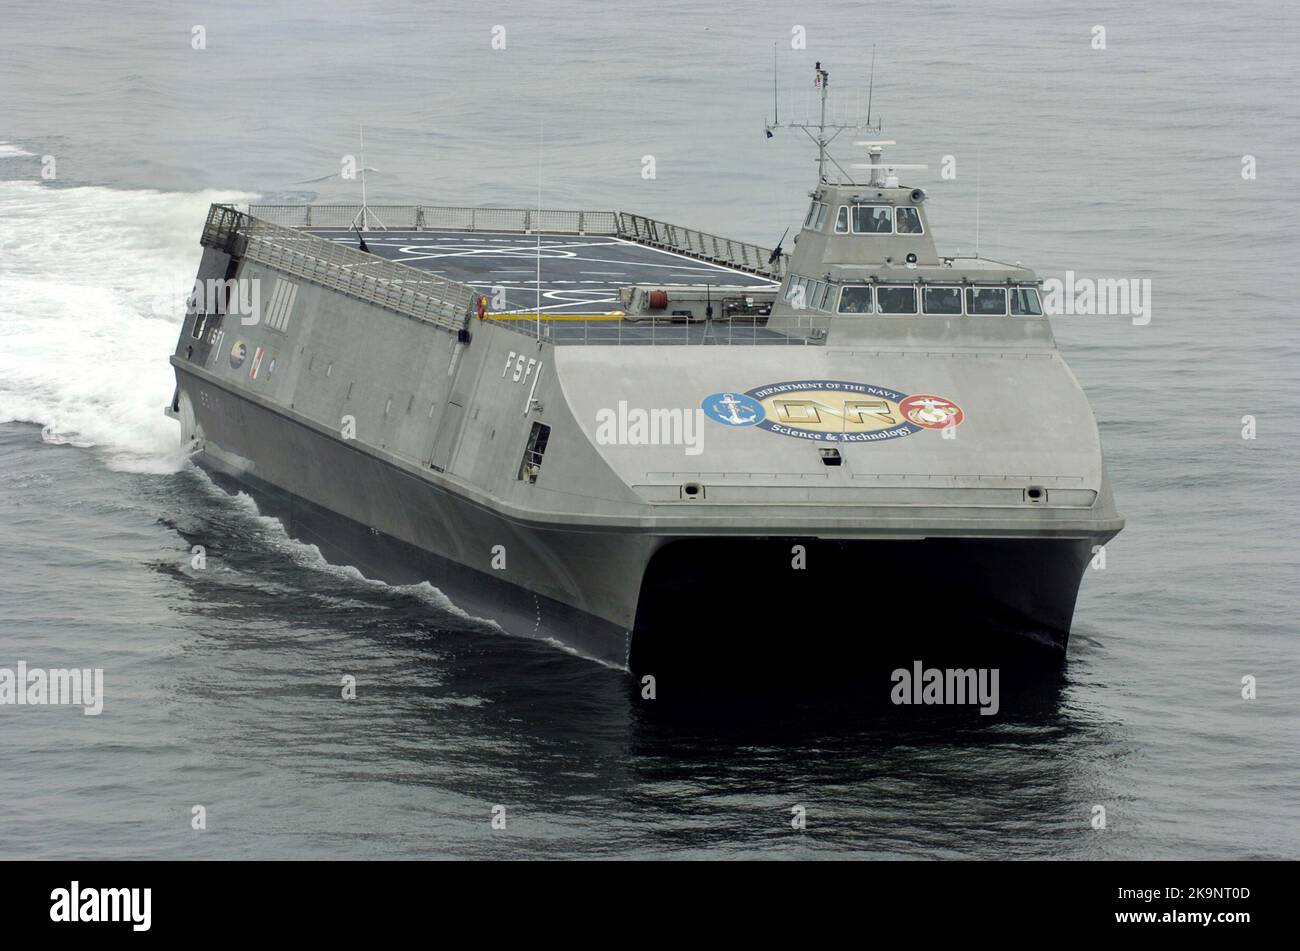 The Littoral Surface Craft-Experimental LSC(X), developed by the Office of Naval Research and christened Sea Fighter (FSF-1) an experimental littoral combat ship in service with the United States Navy Stock Photo